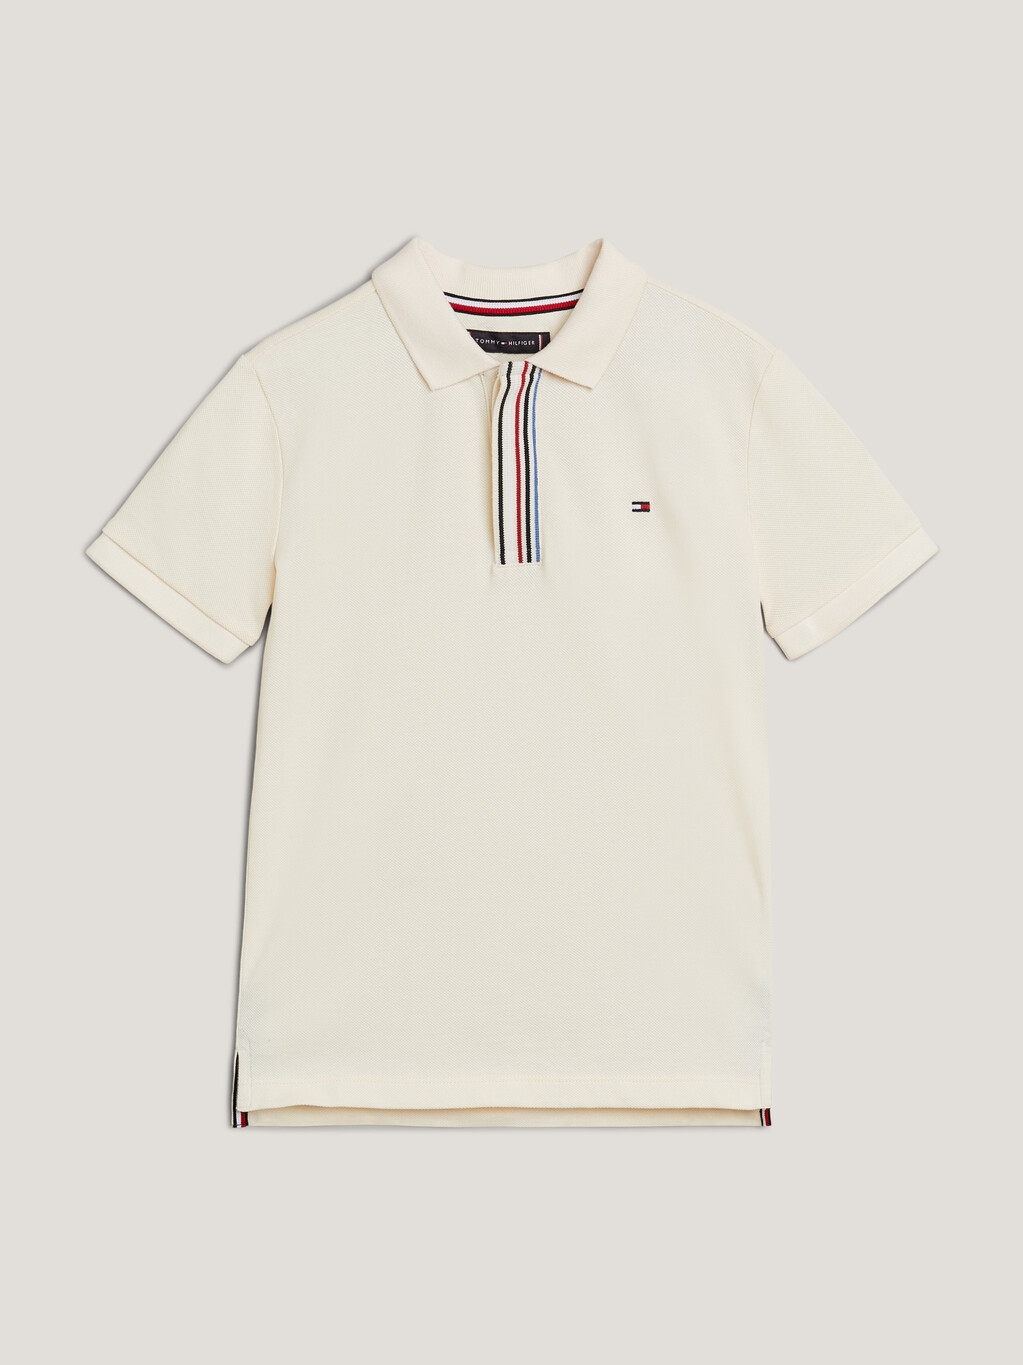 Global Stripe Concealed Placket Polo, Calico, hi-res